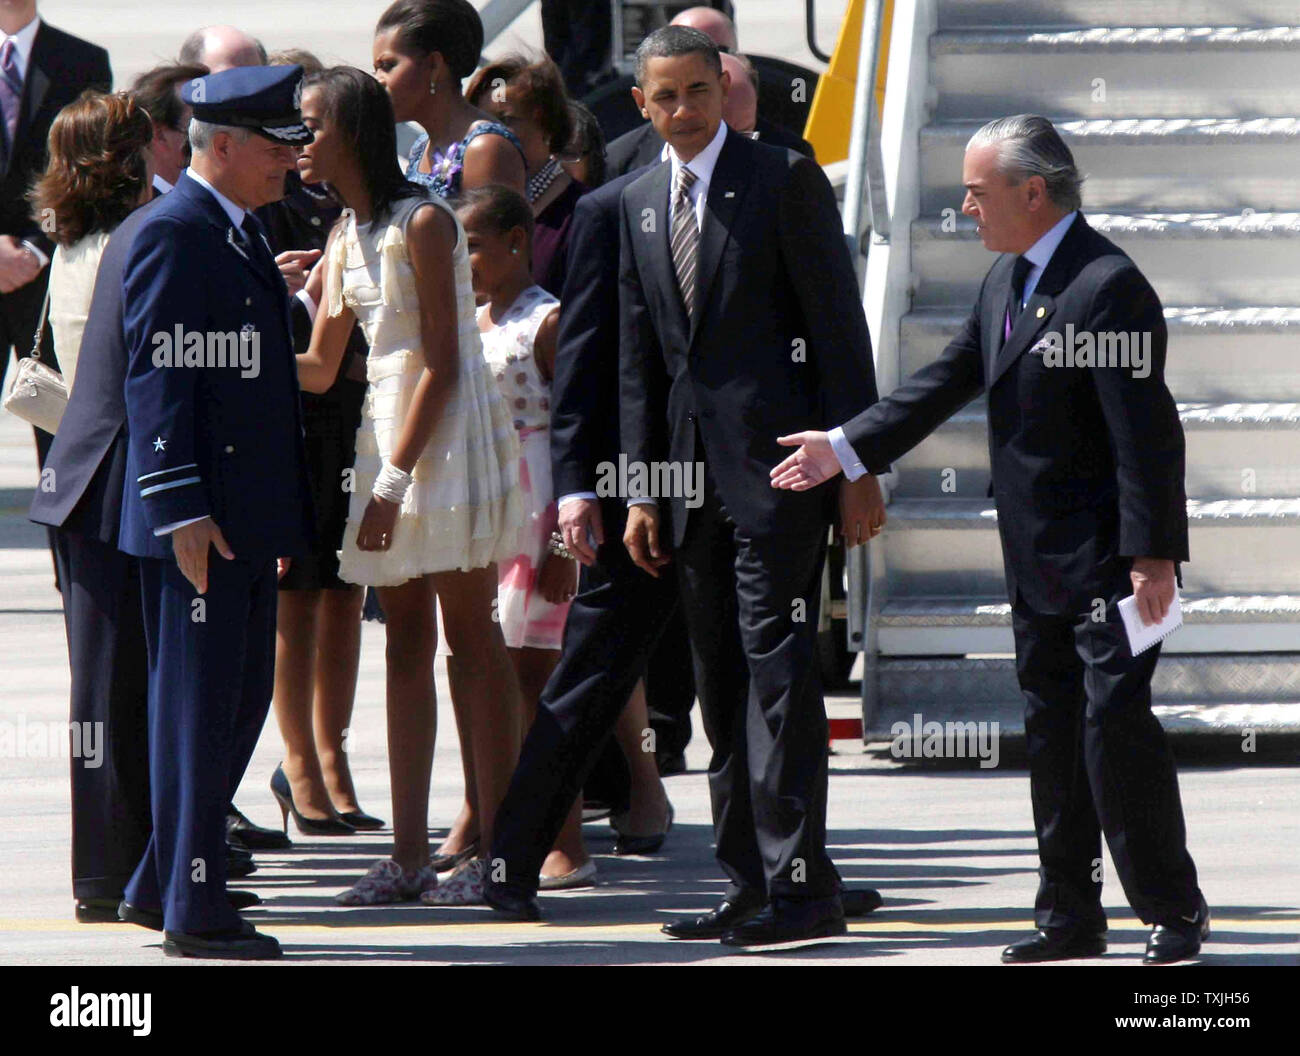 U.S. President Barack Obama is greeted by Chilean Foreign Minister Alfredo Moreno as he and his family arrive in Santiago, Chile on March 21, 2011. Obama traveled to Santiago, Chile, for the second stop of his Latin America visit.  UPI/Sebastian Padilla Rodriguez Stock Photo